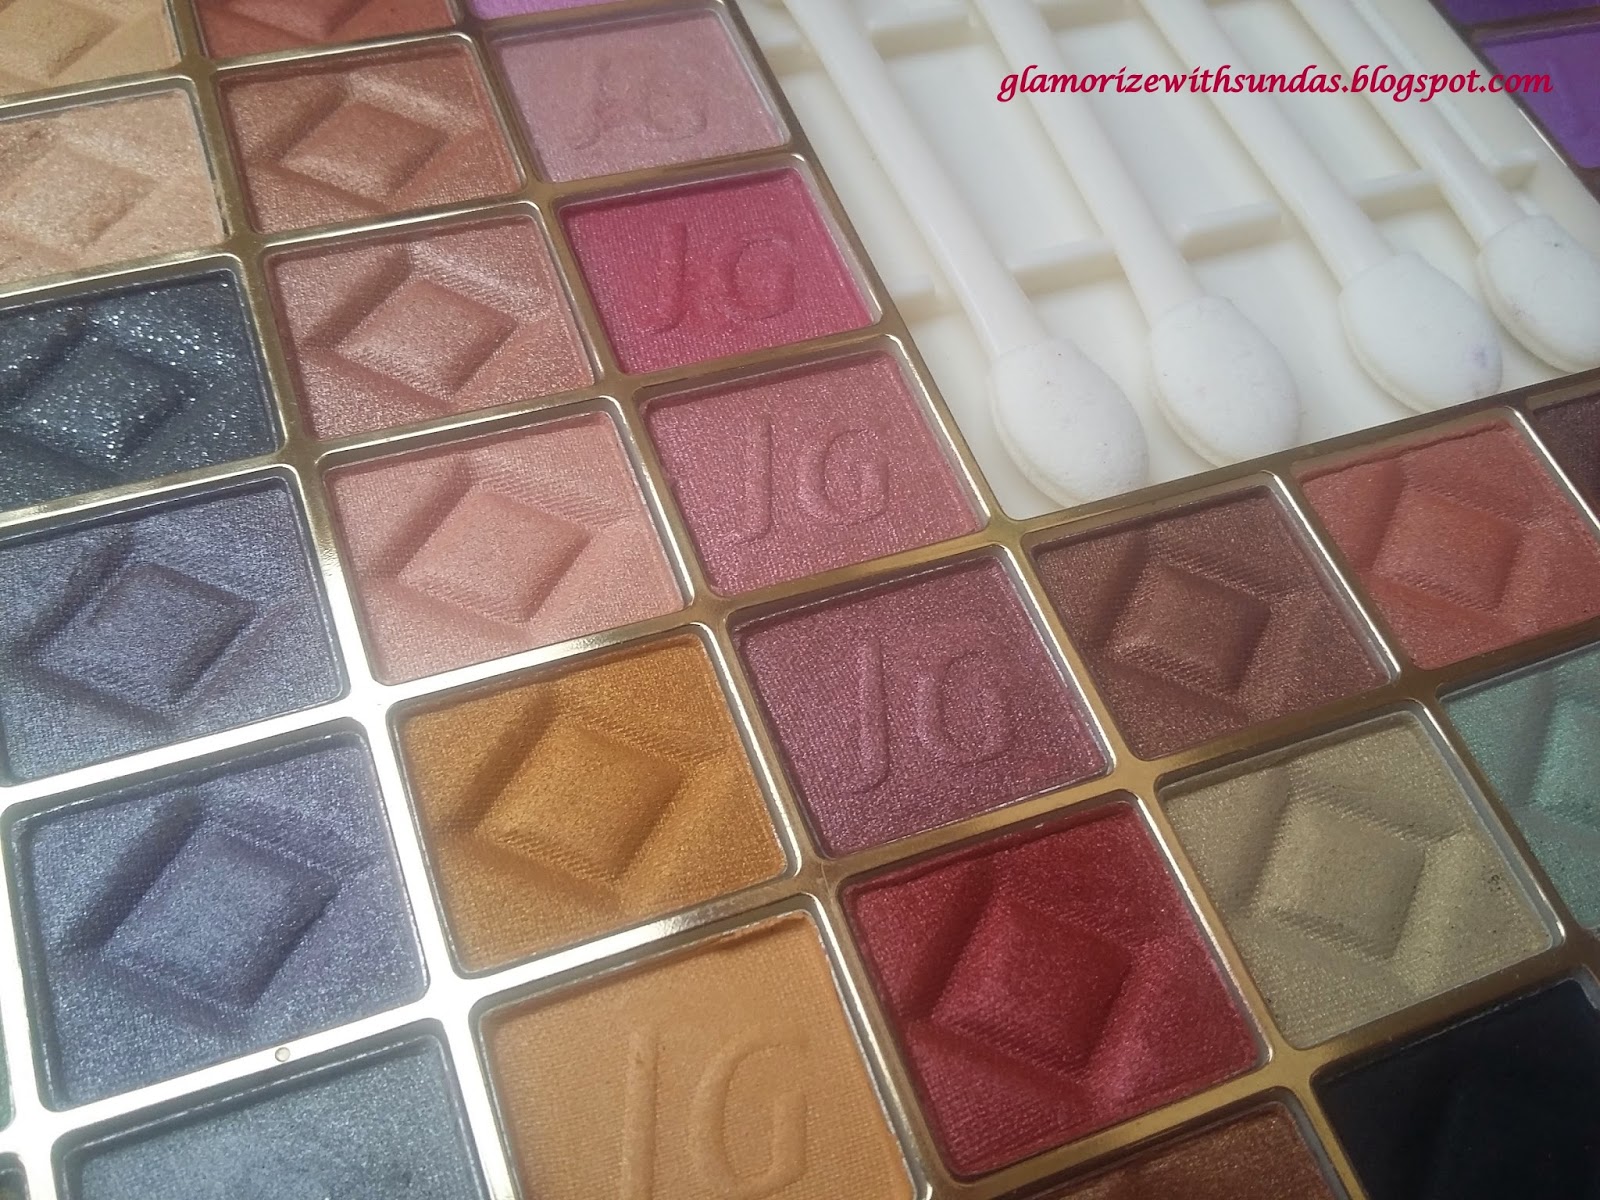 Glamorize With Sundas Just Gold 98 Eyeshadow Palette Review And Images, Photos, Reviews